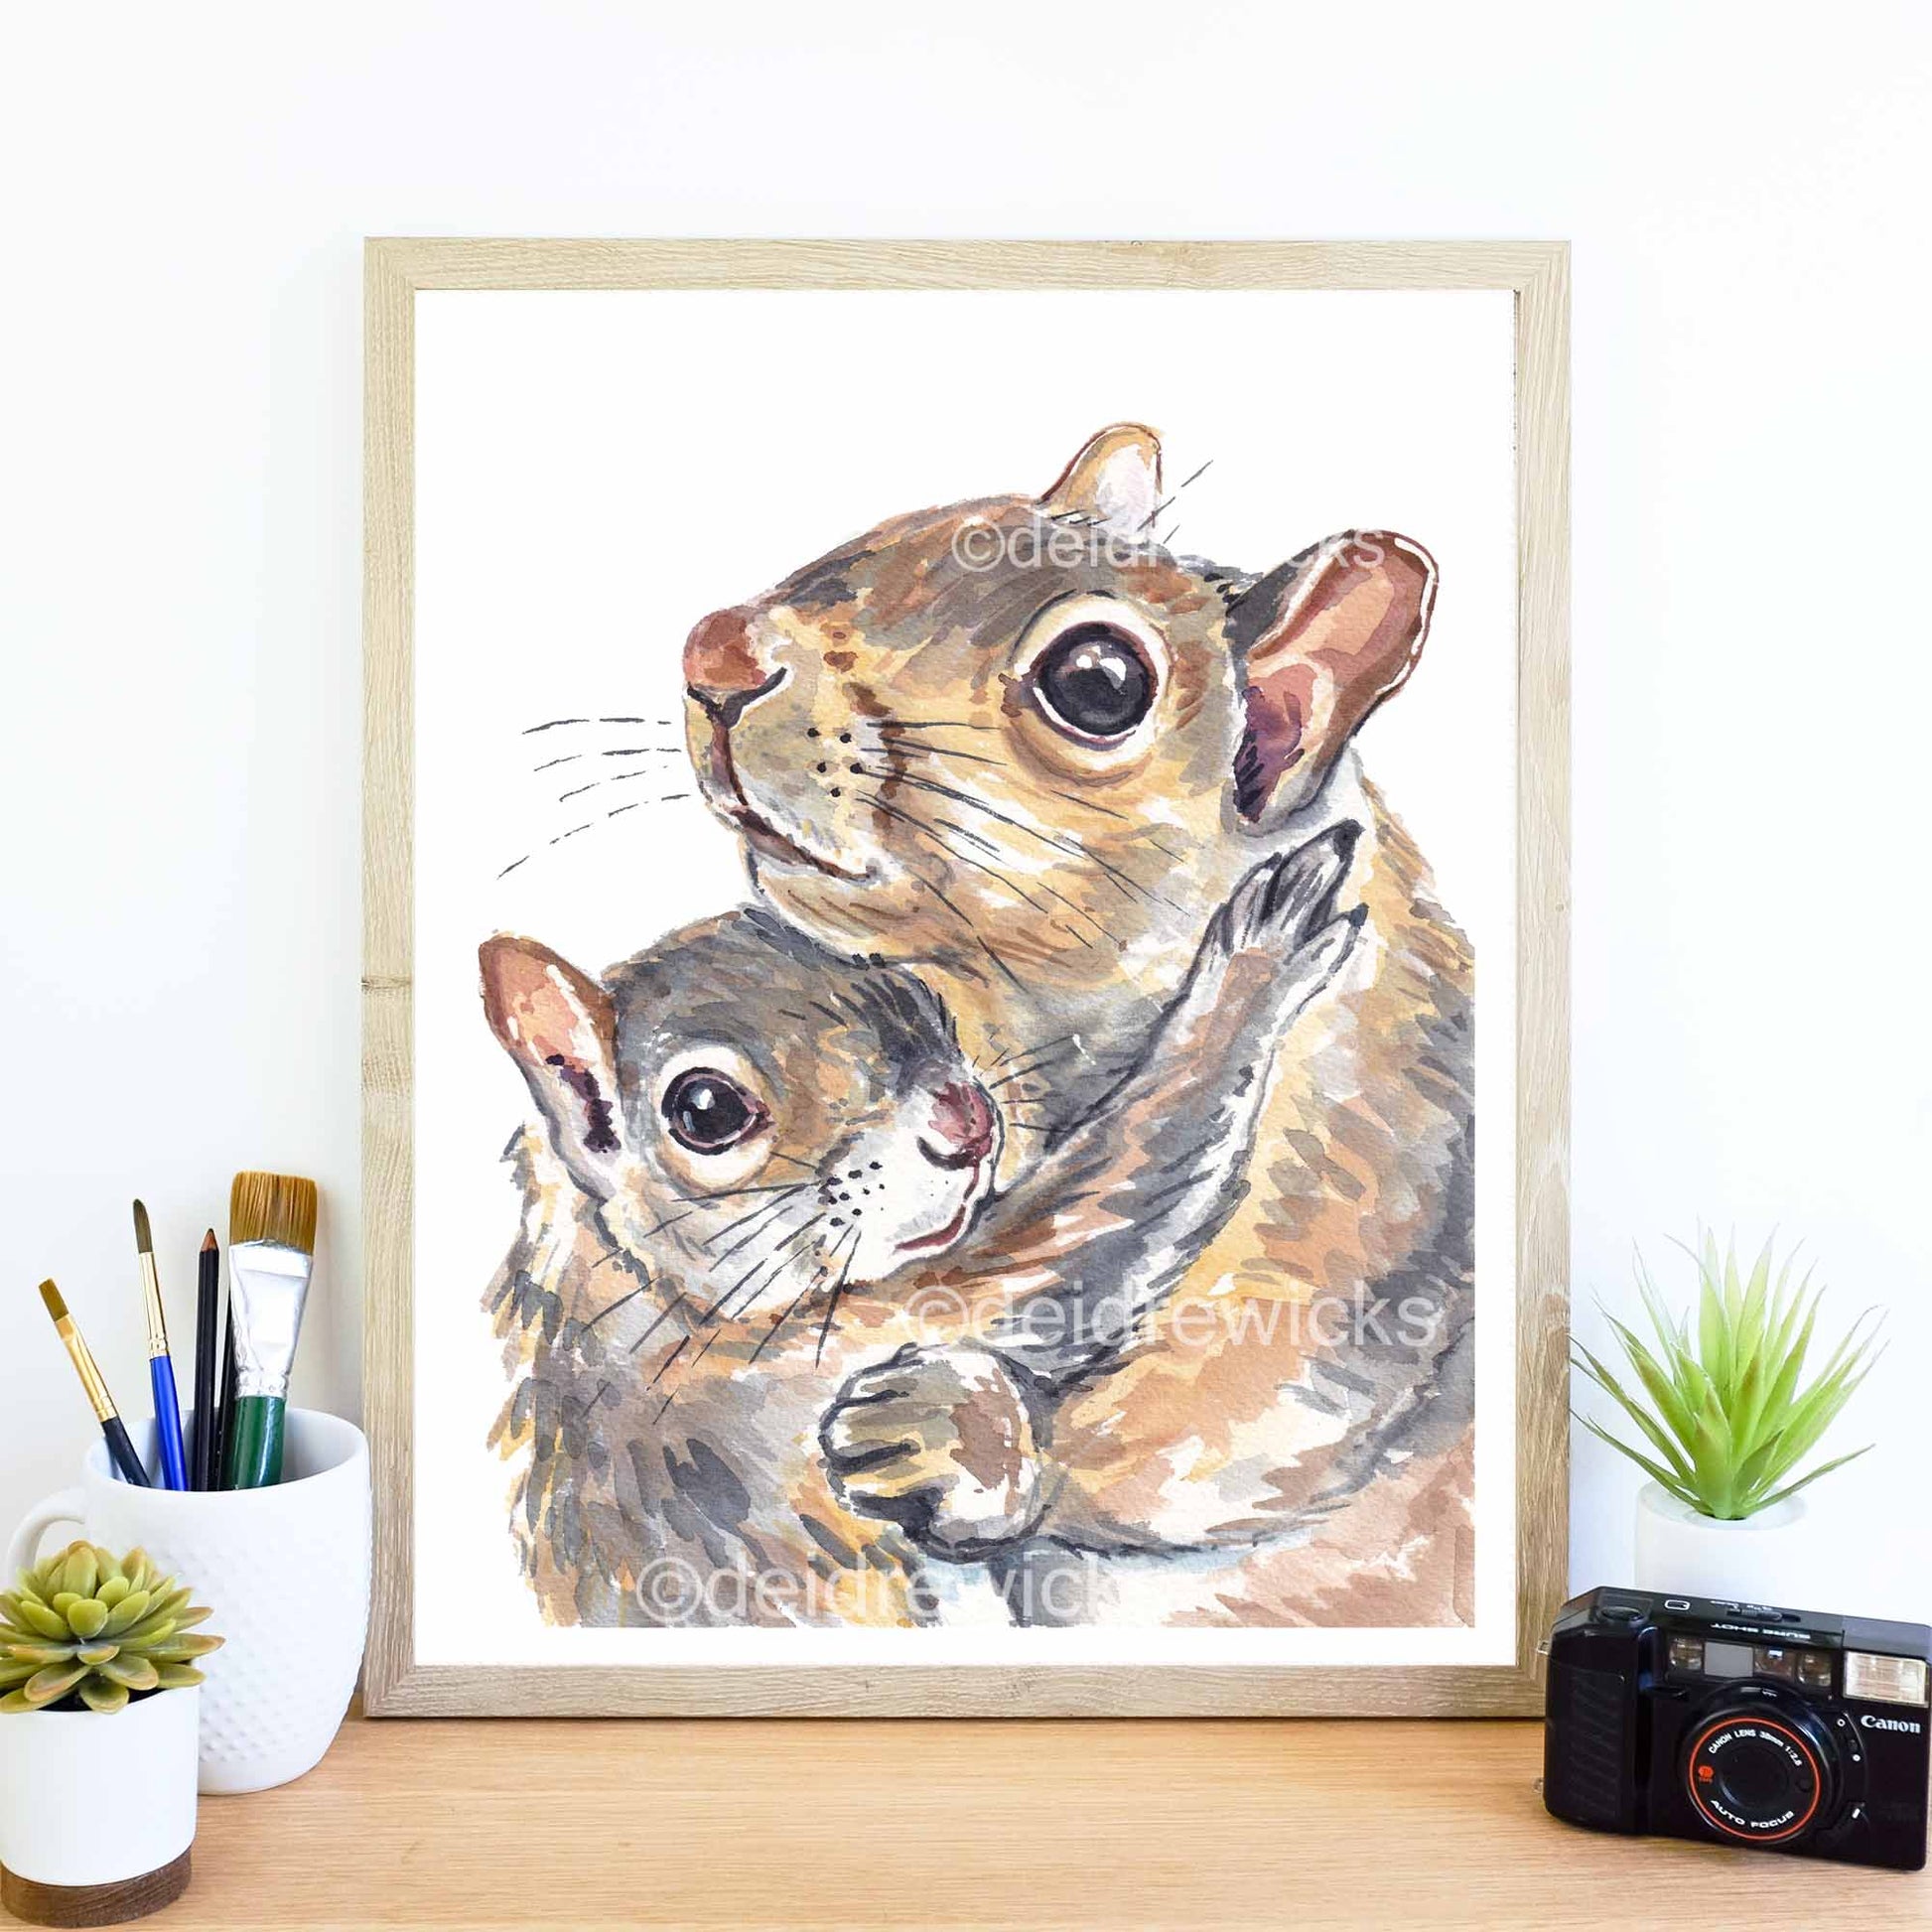 Framed example of a squirrel watercolour painting print by Water In My Paint